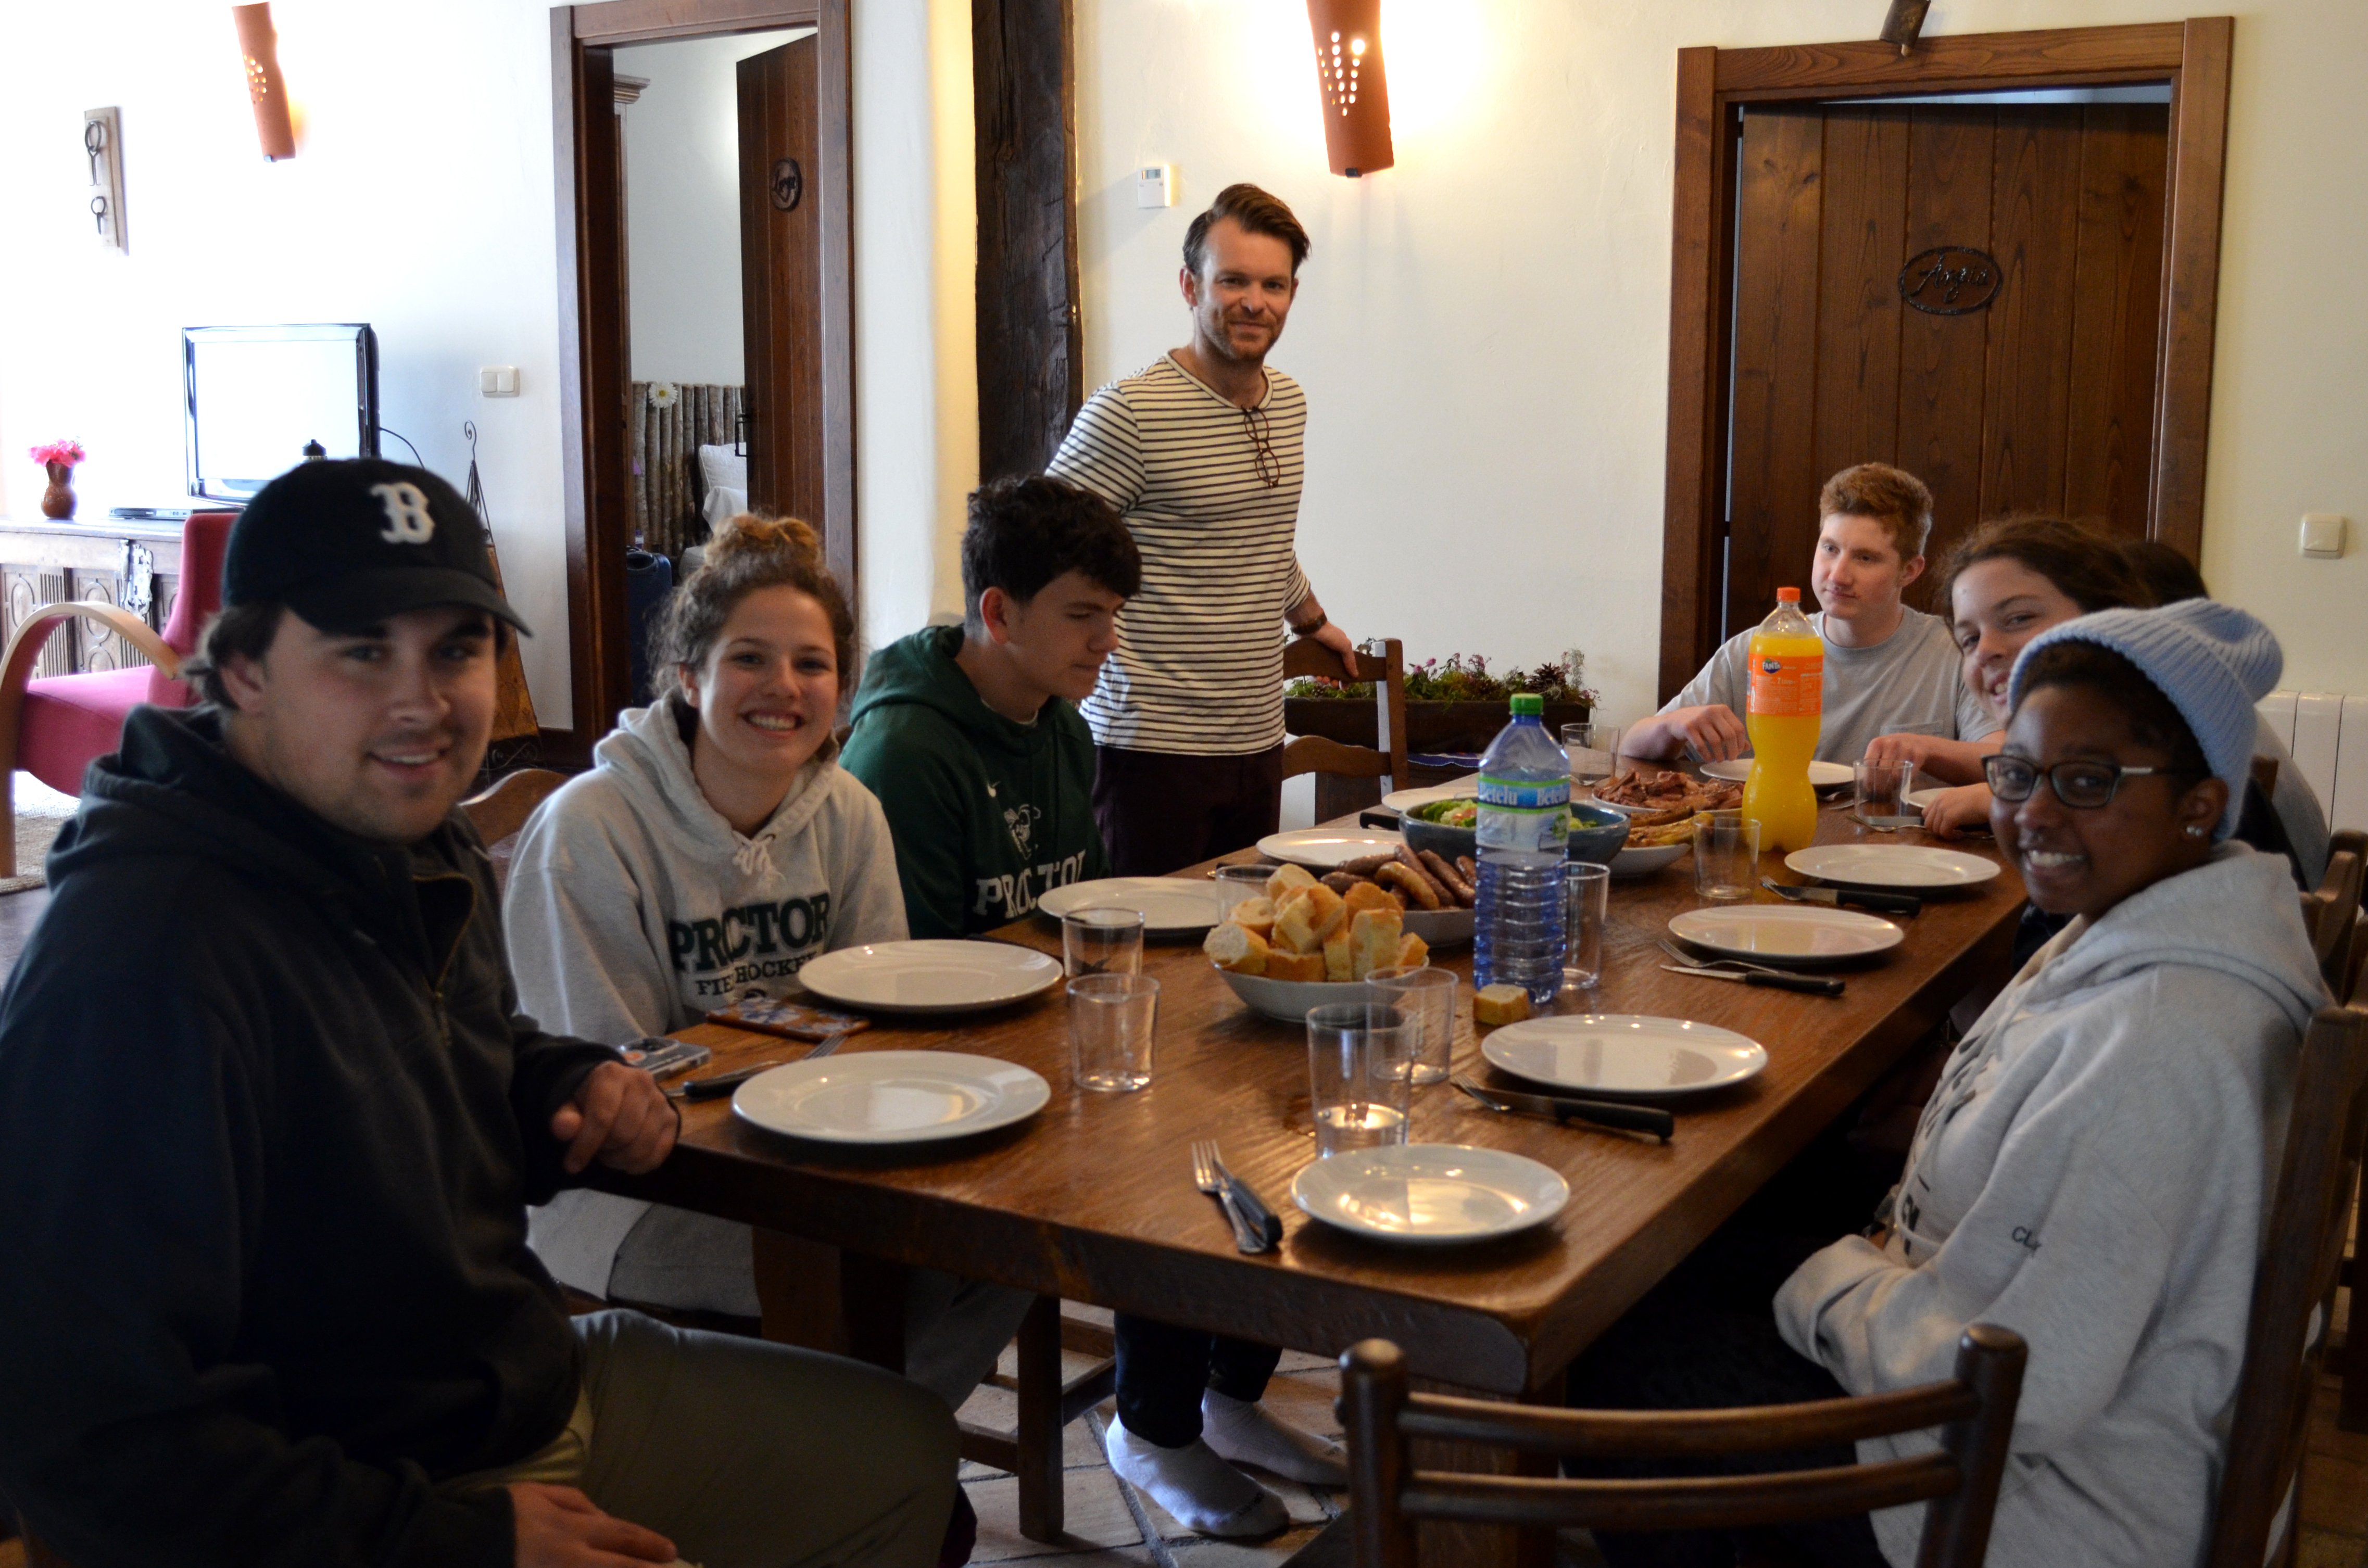 Proctor students share a traditional meal in Basque Country